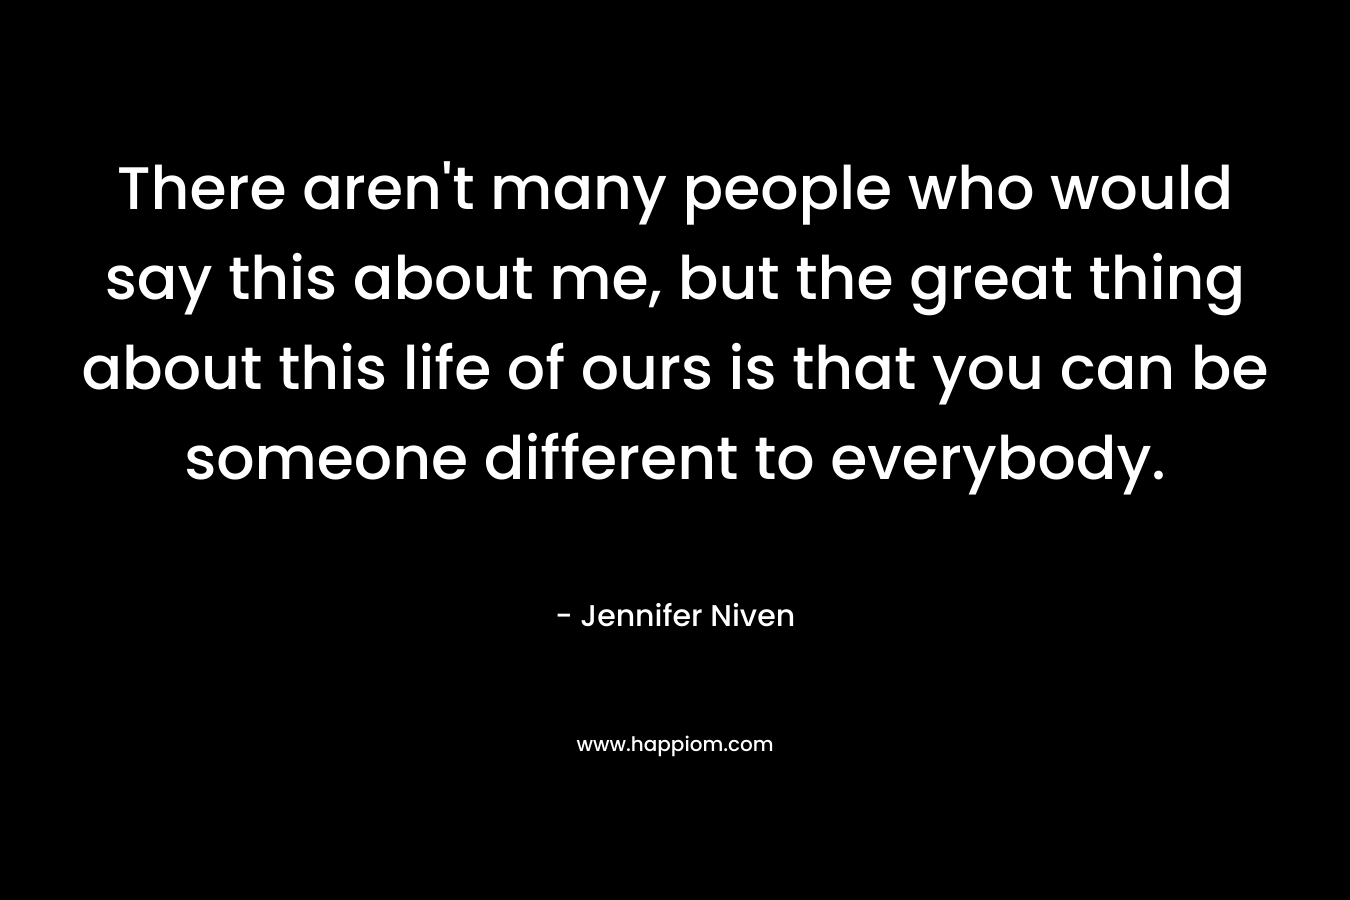 There aren’t many people who would say this about me, but the great thing about this life of ours is that you can be someone different to everybody. – Jennifer Niven